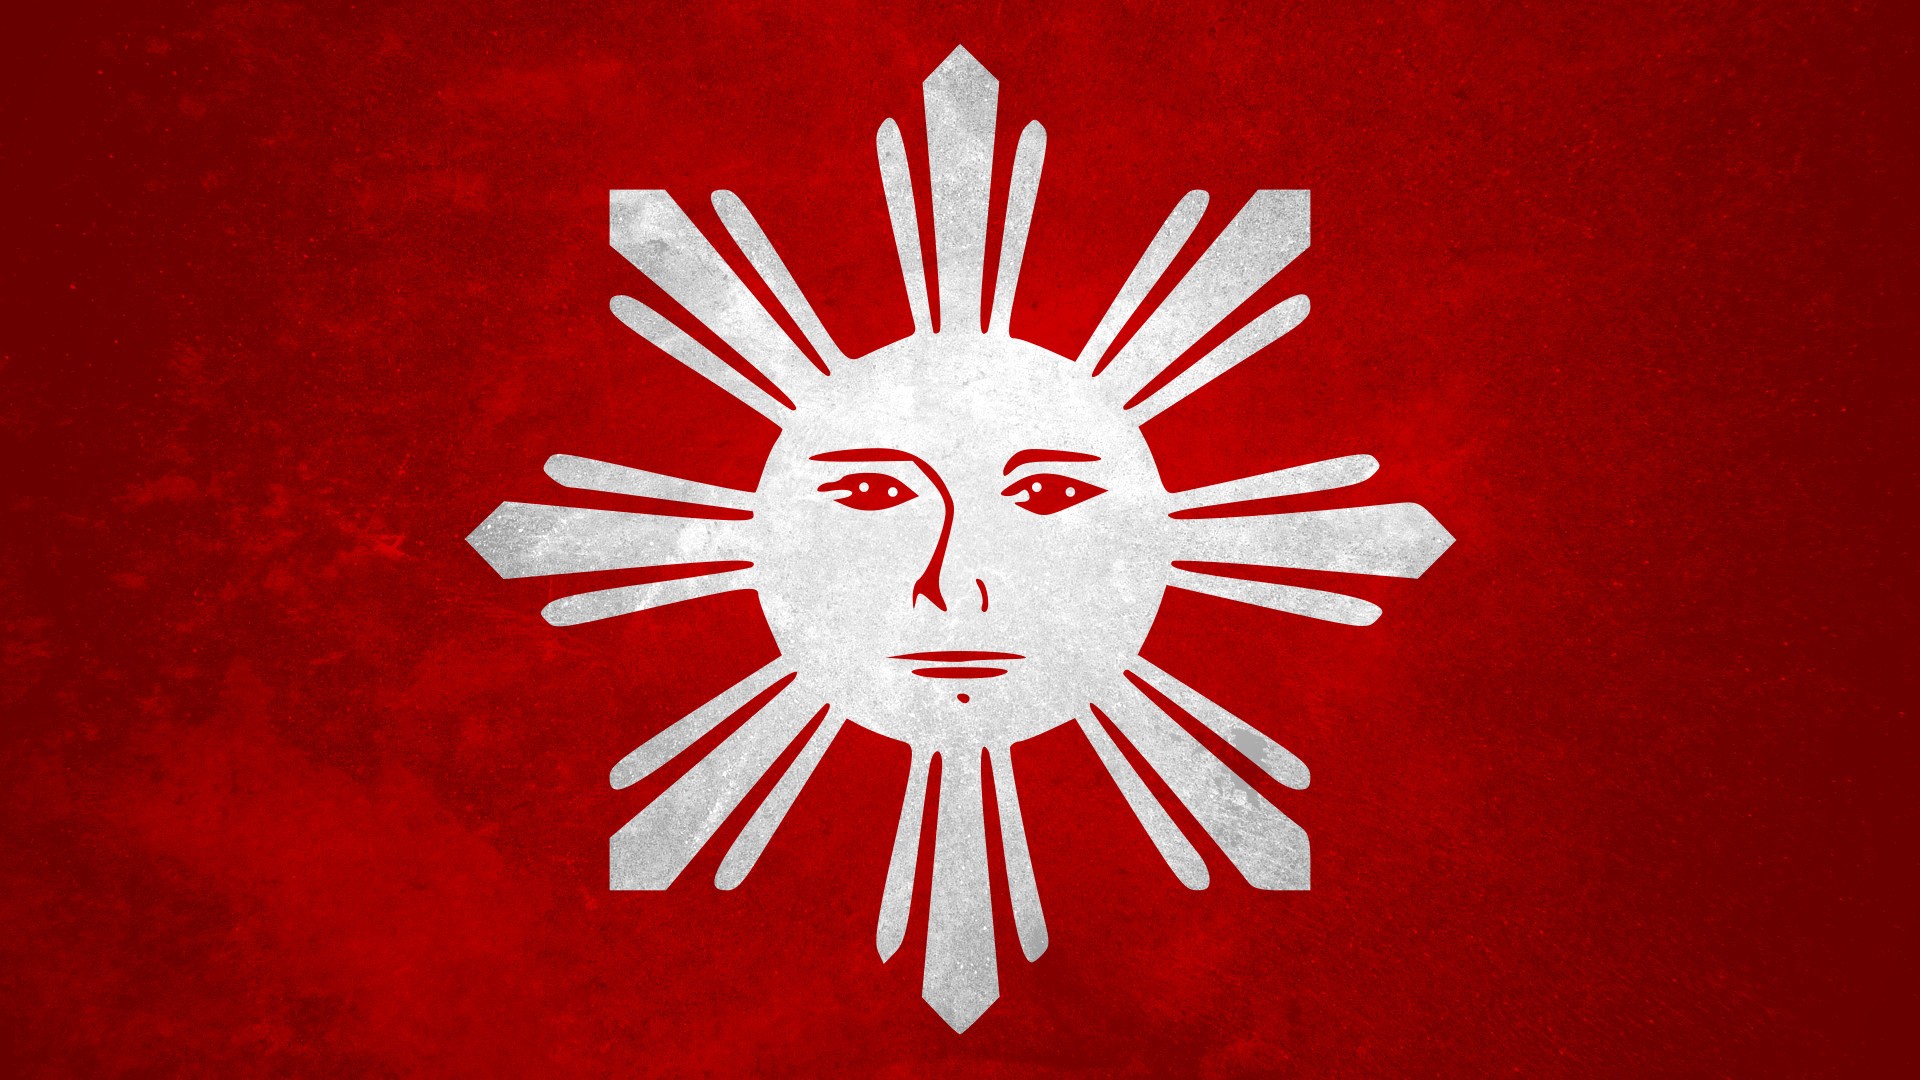 General 1920x1080 flag red background logo Philippines history digital art simple background